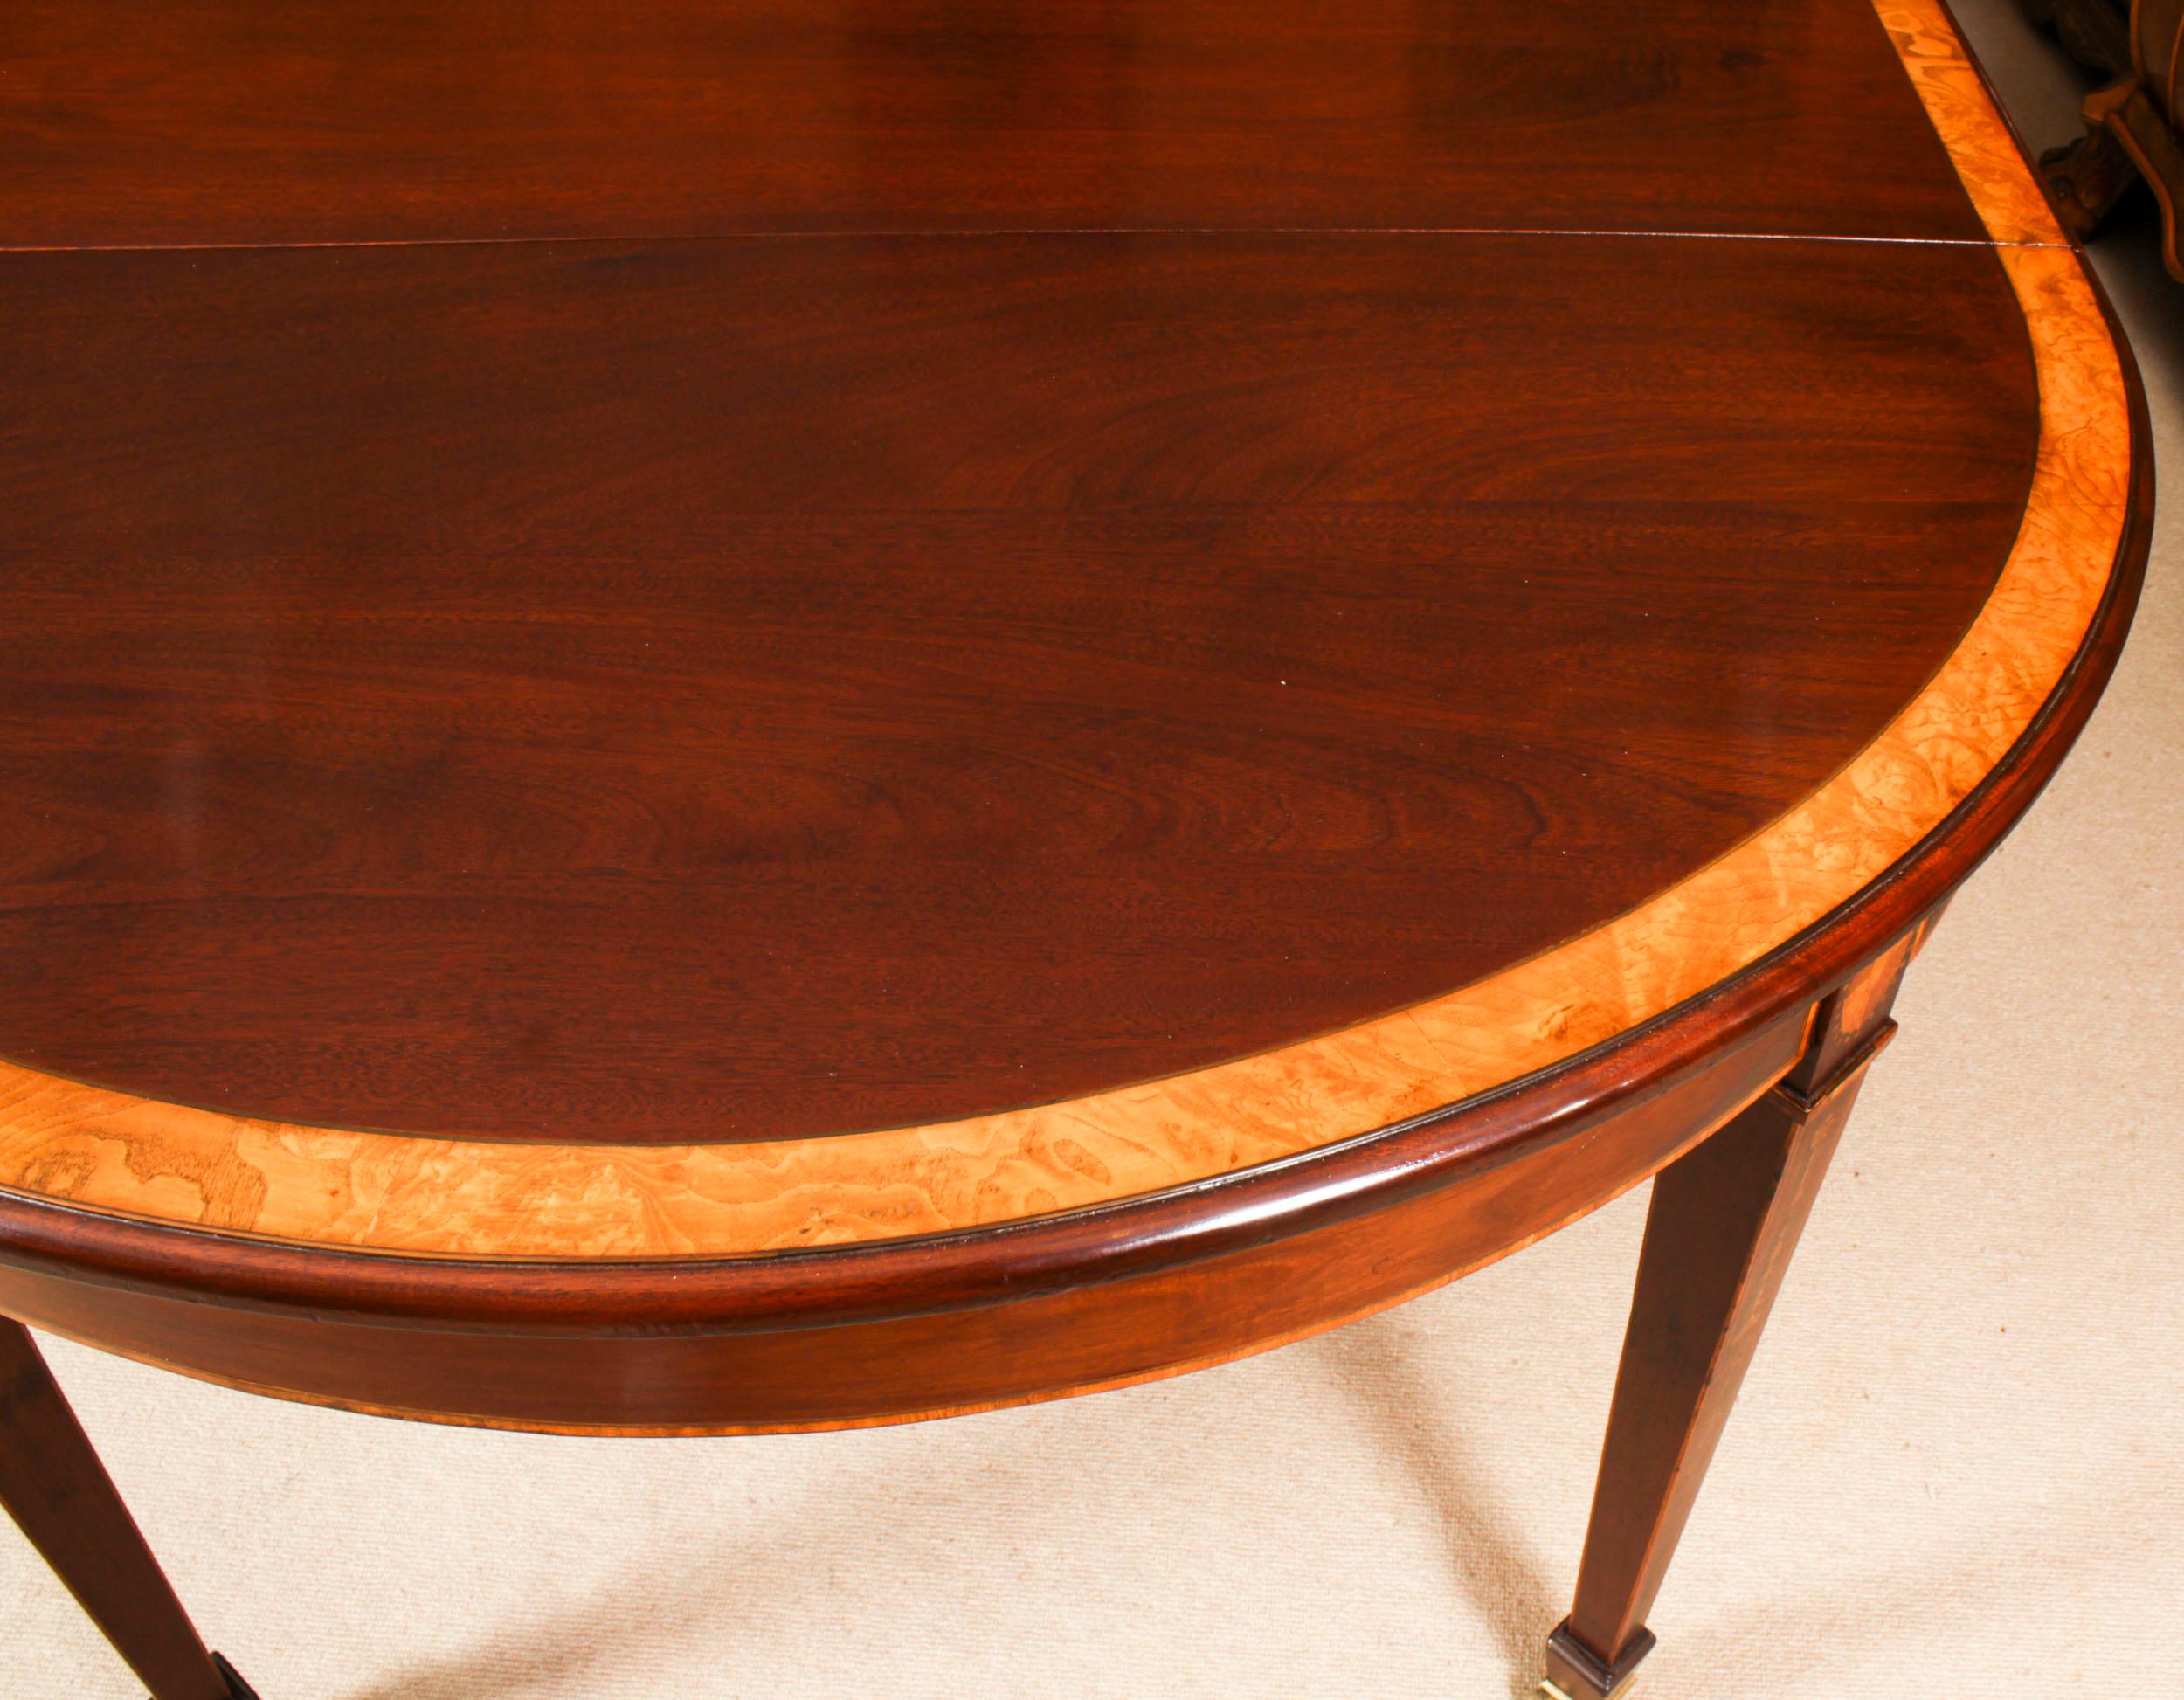 Antique Edwardian Inlaid Flame Mahogany Extending Dining Table Early 20th C. 7